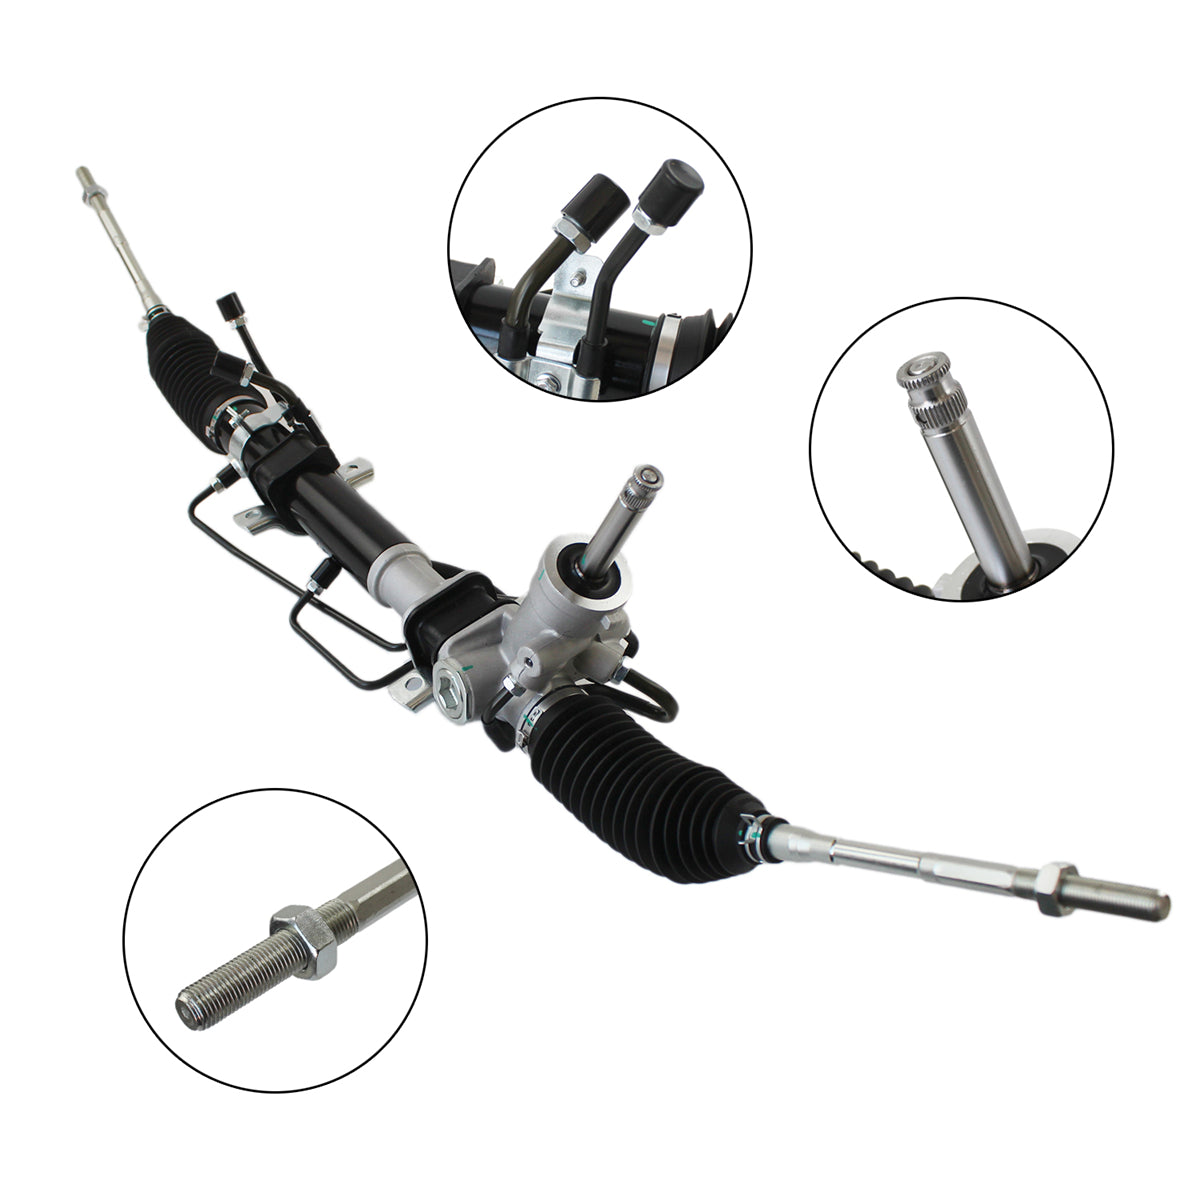 Daysyore® Power Steering Rack and Pinion for Subaru Forester H4 2.5L 2005-2008 26-2312